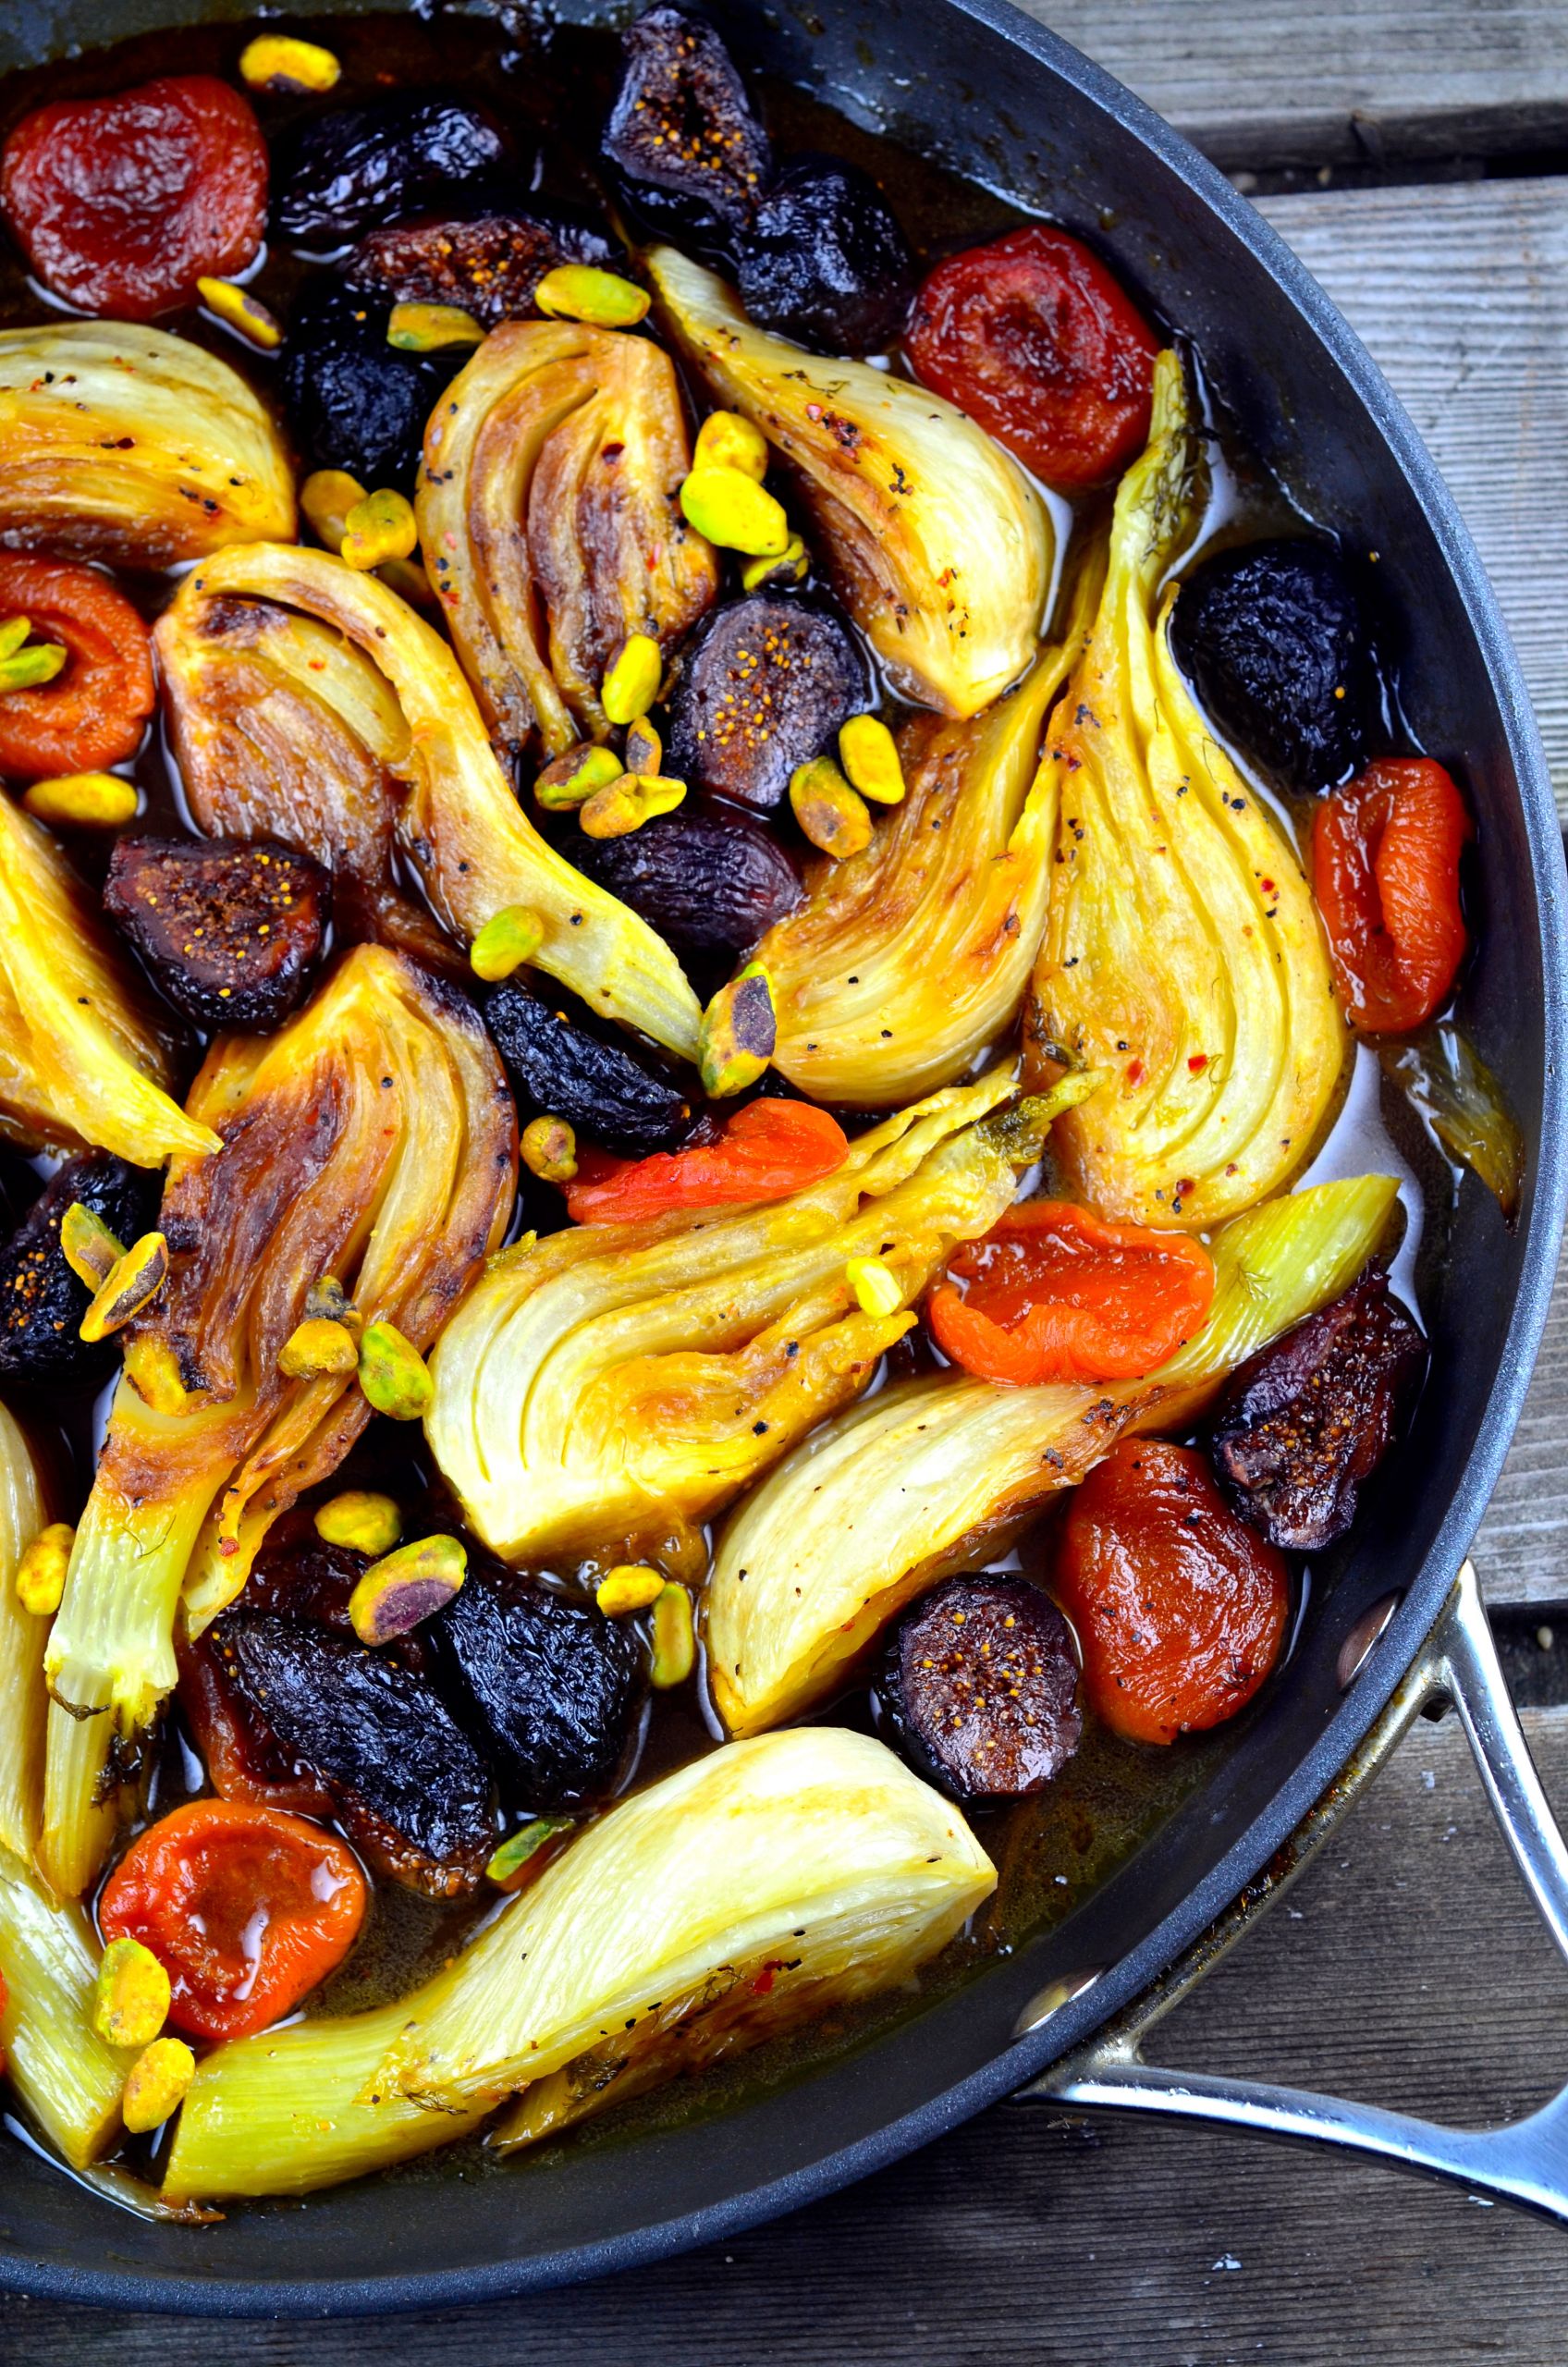 Vegan Passover Recipes
 Passover Recipes Braised Fennel with Apricots and Figs